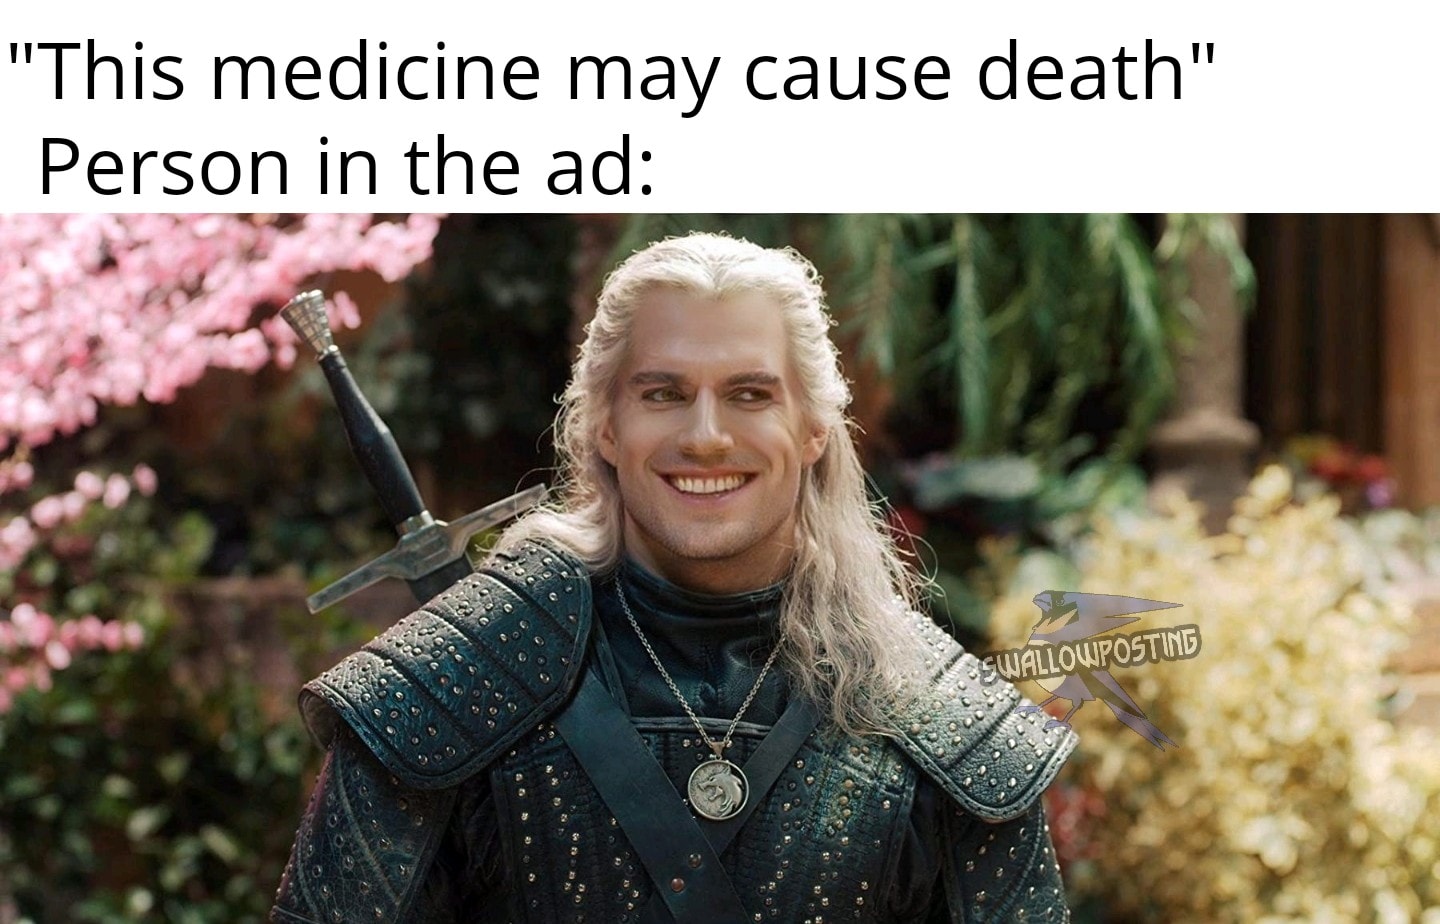 The Witcher - "This medicine may cause death" Person in the ad Ooogo Swallowposting